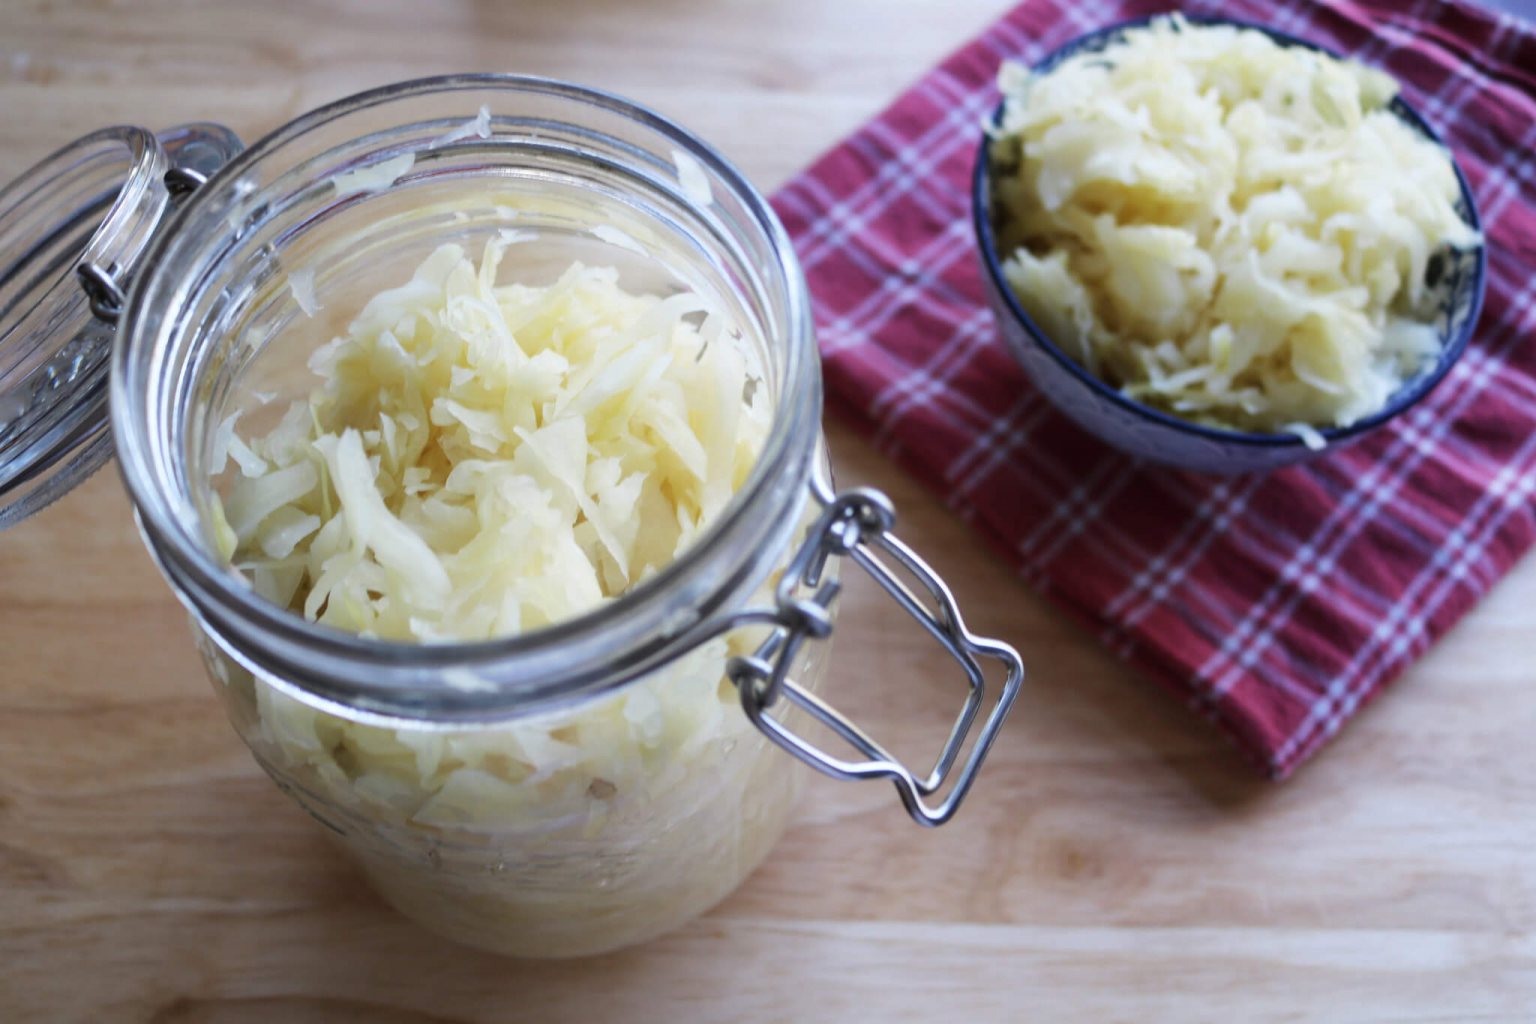 Can Dogs Eat Sauerkraut? Find our at Healthy Doggo